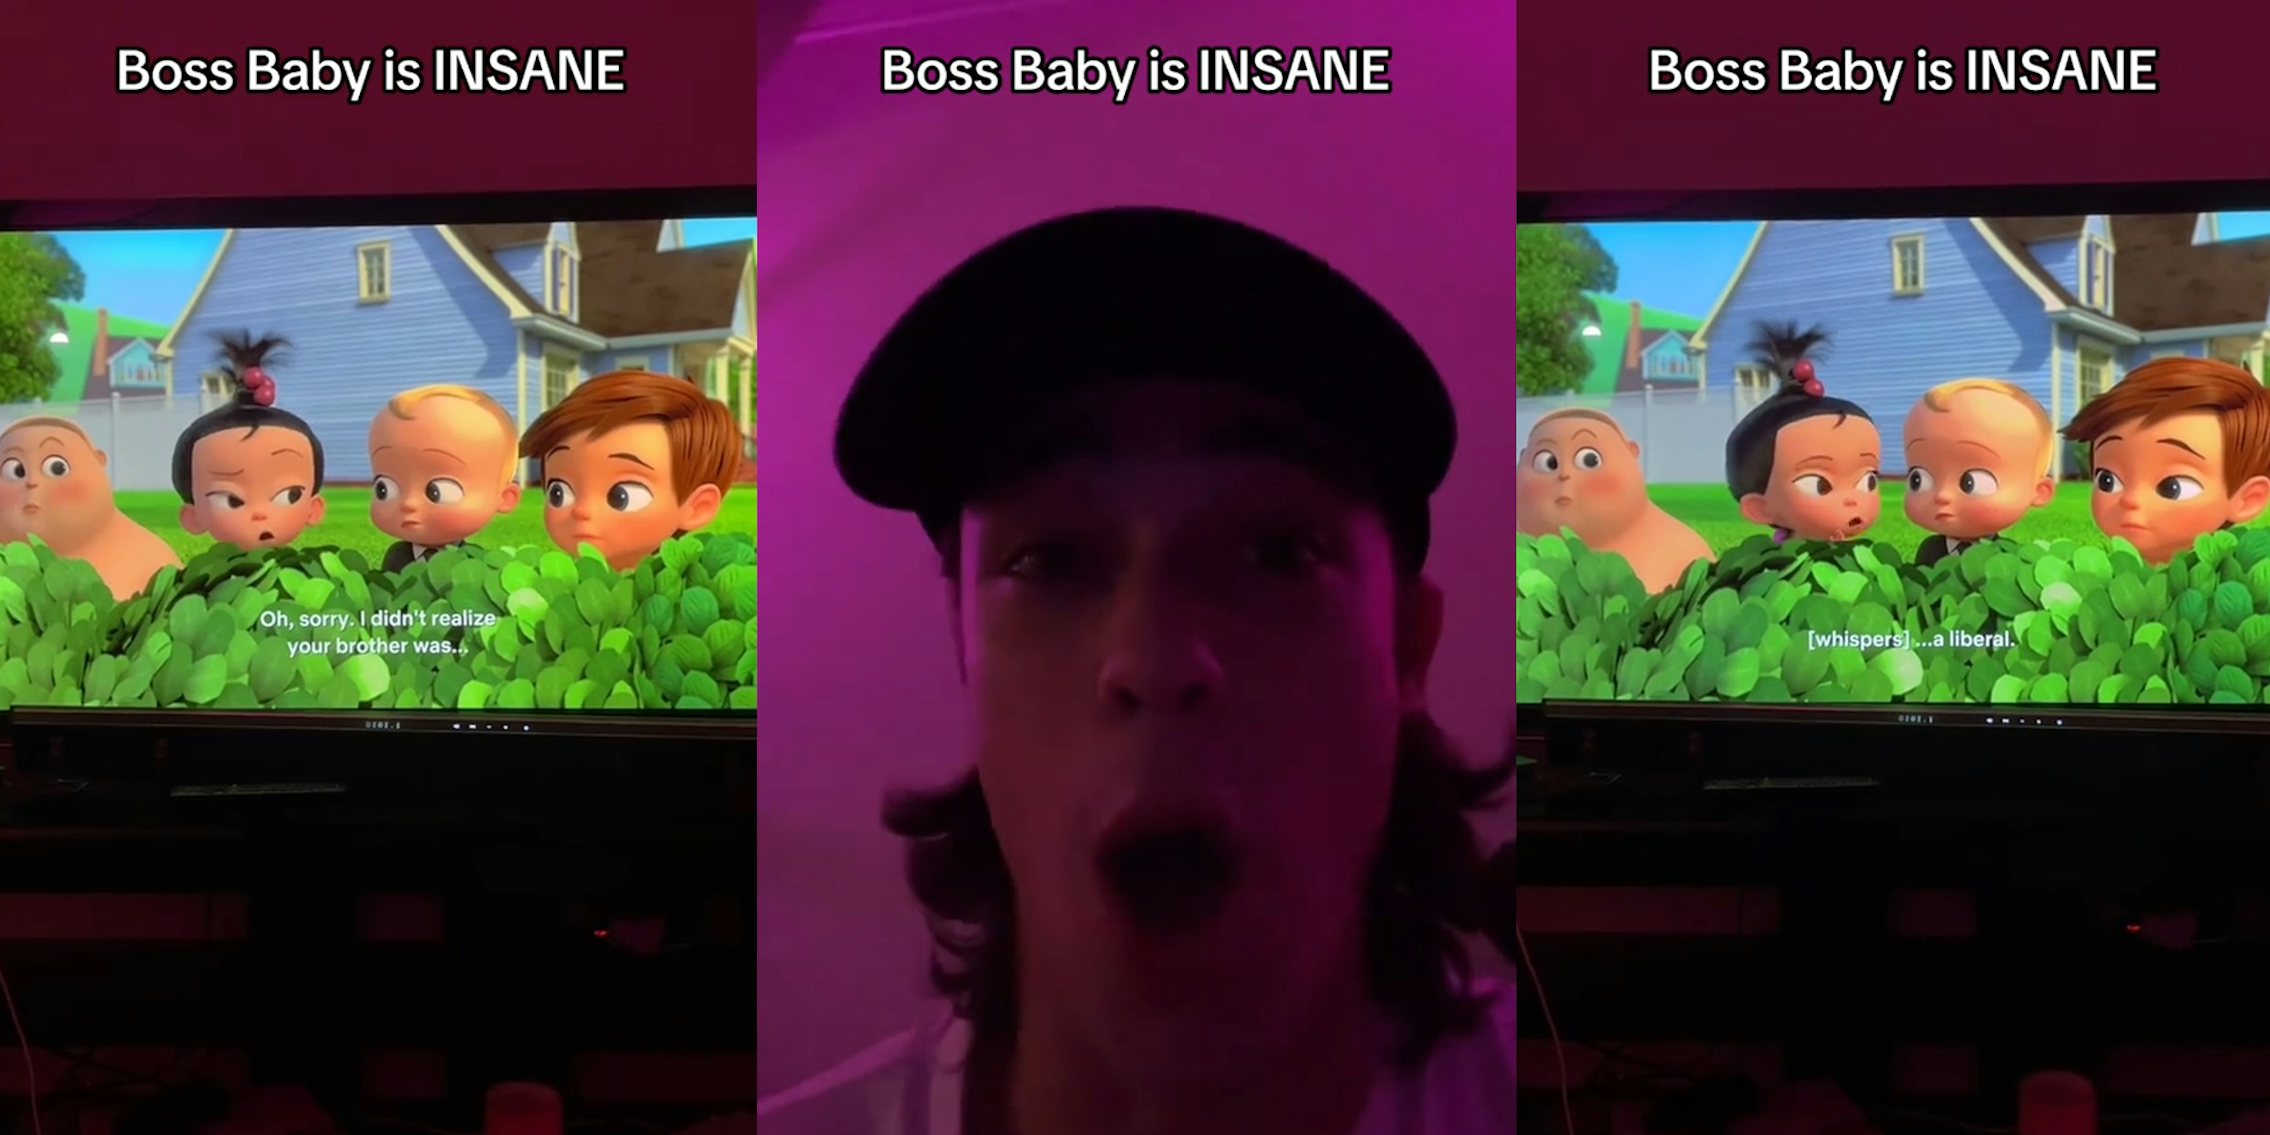 Boss Baby playing on tv with caption 'Boss Baby is INSANE' (l) man speaking with caption 'Boss Baby is INSANE' (c) Boss Baby playing on tv with caption 'Boss Baby is INSANE' (r)